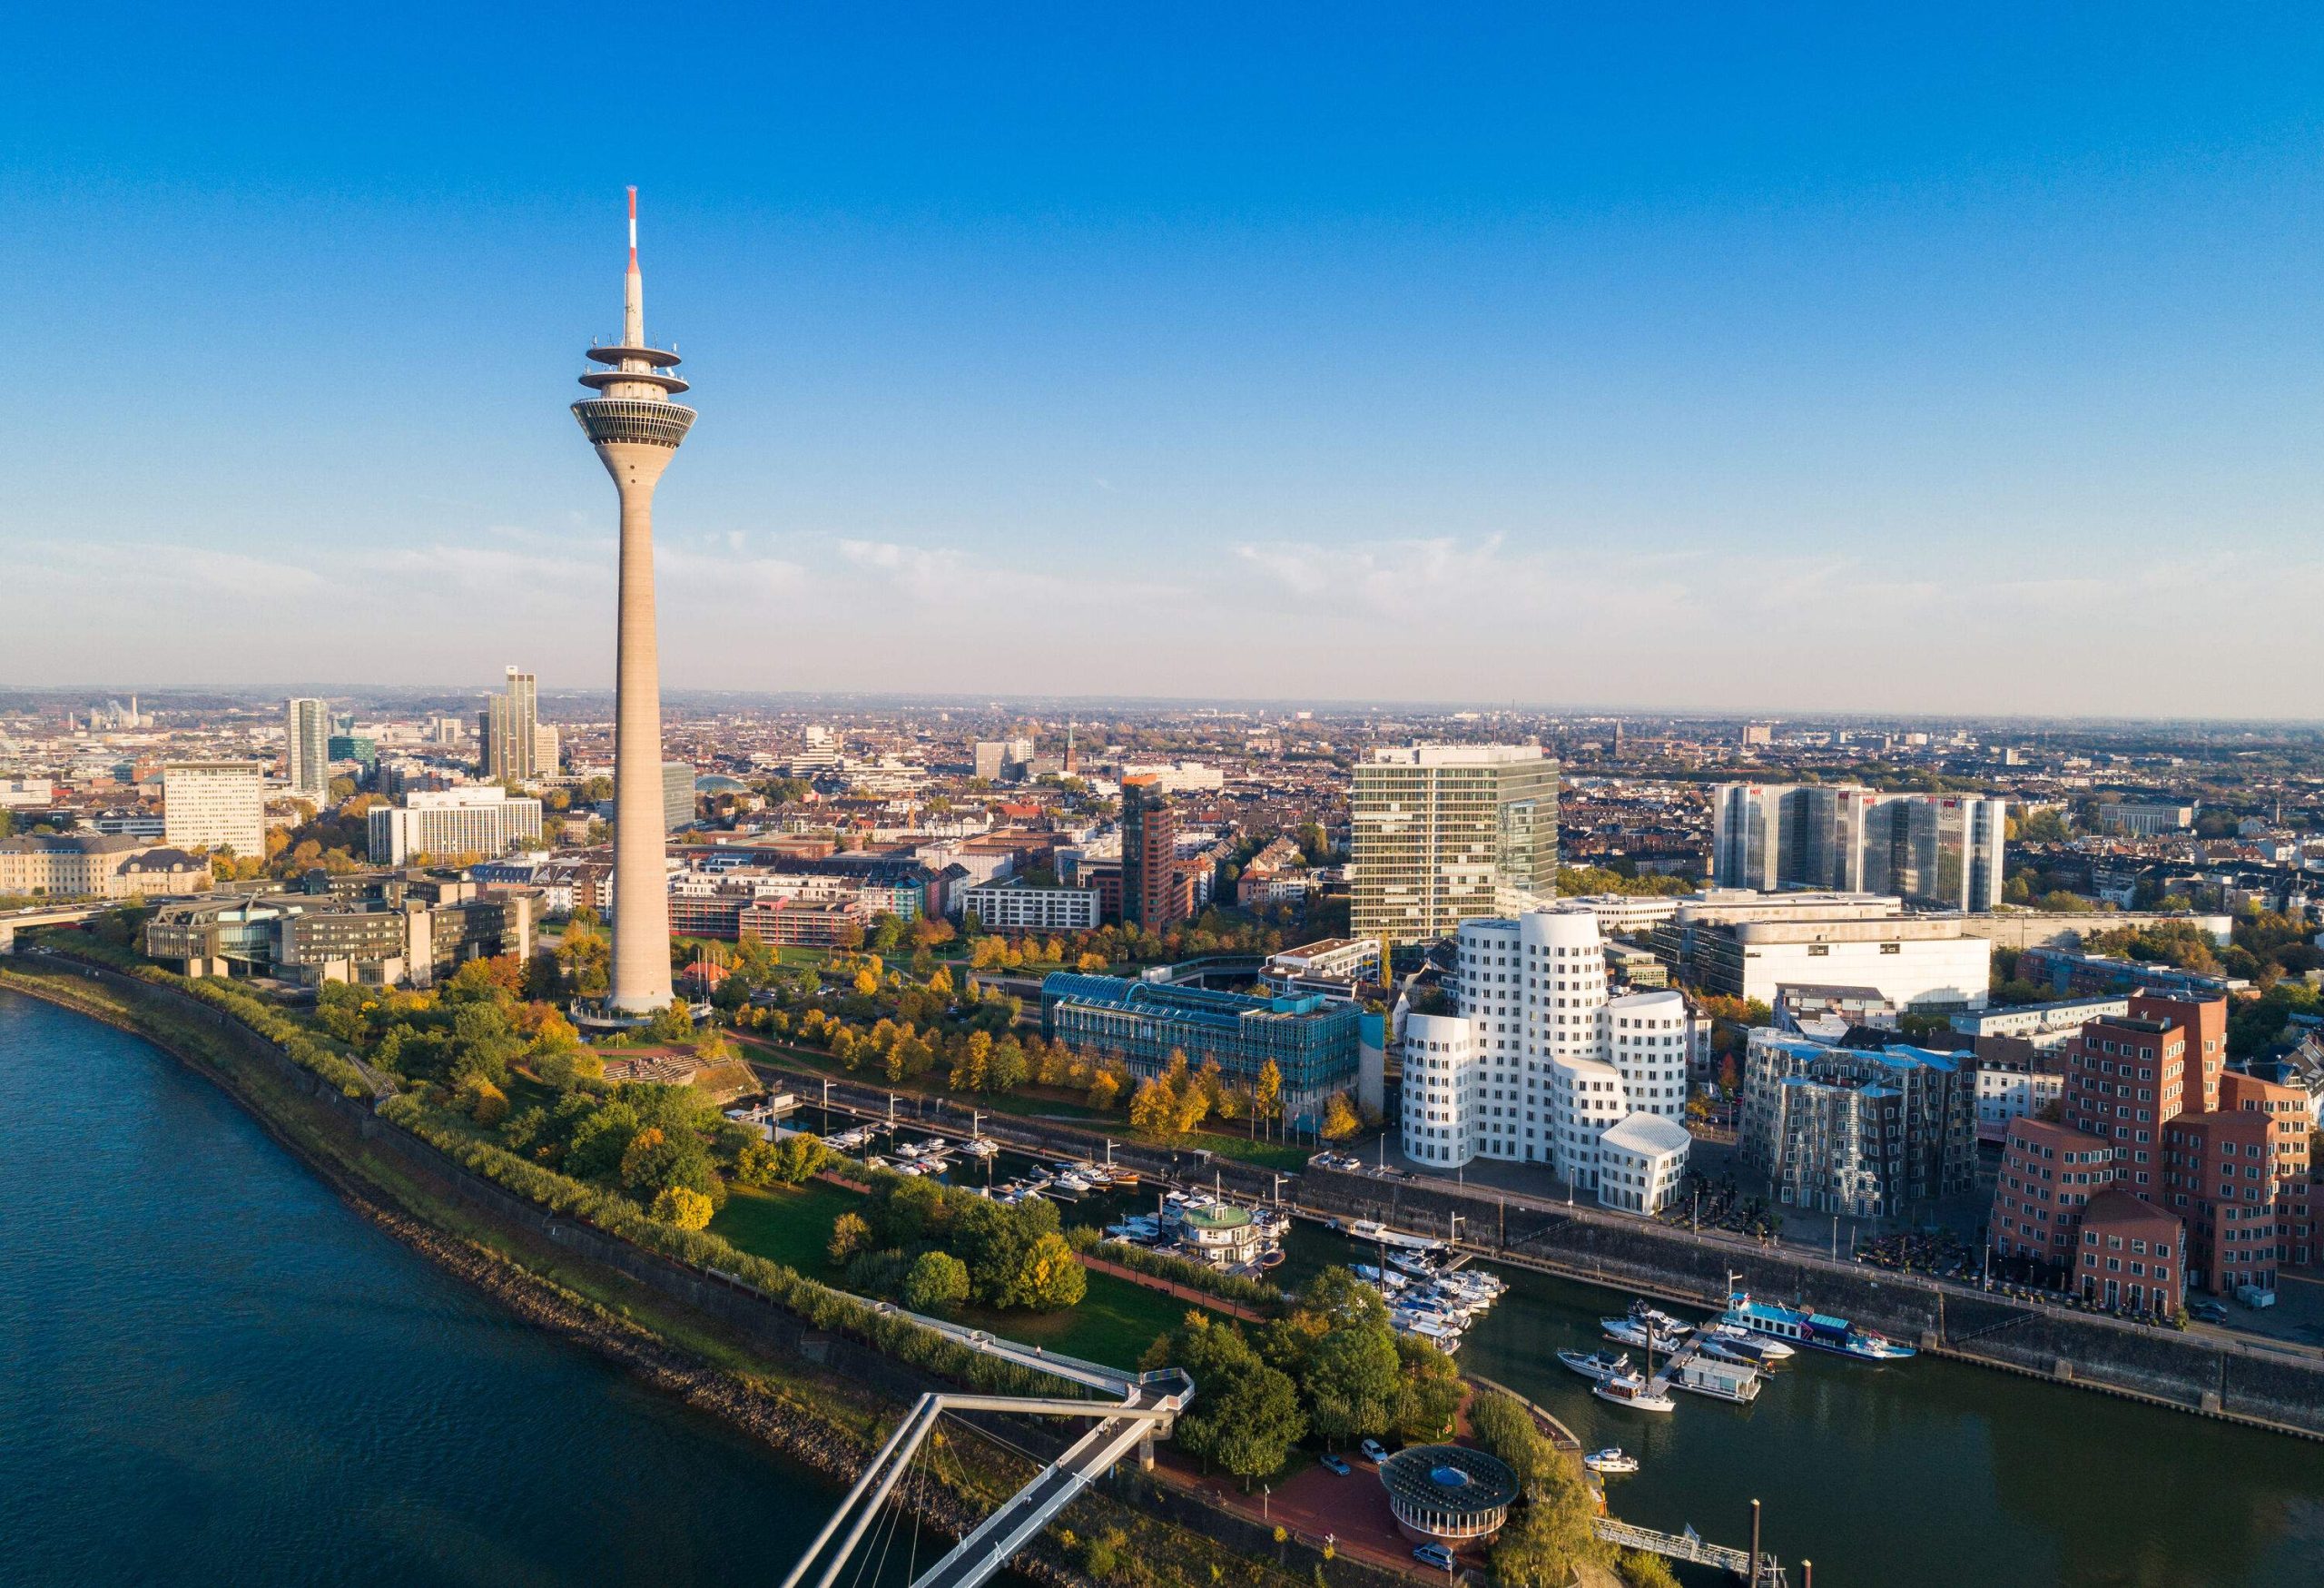 Rheinturm is a telecommunications tower overlooking the river, anchored boats in a marina, and the urban landscape of a city.